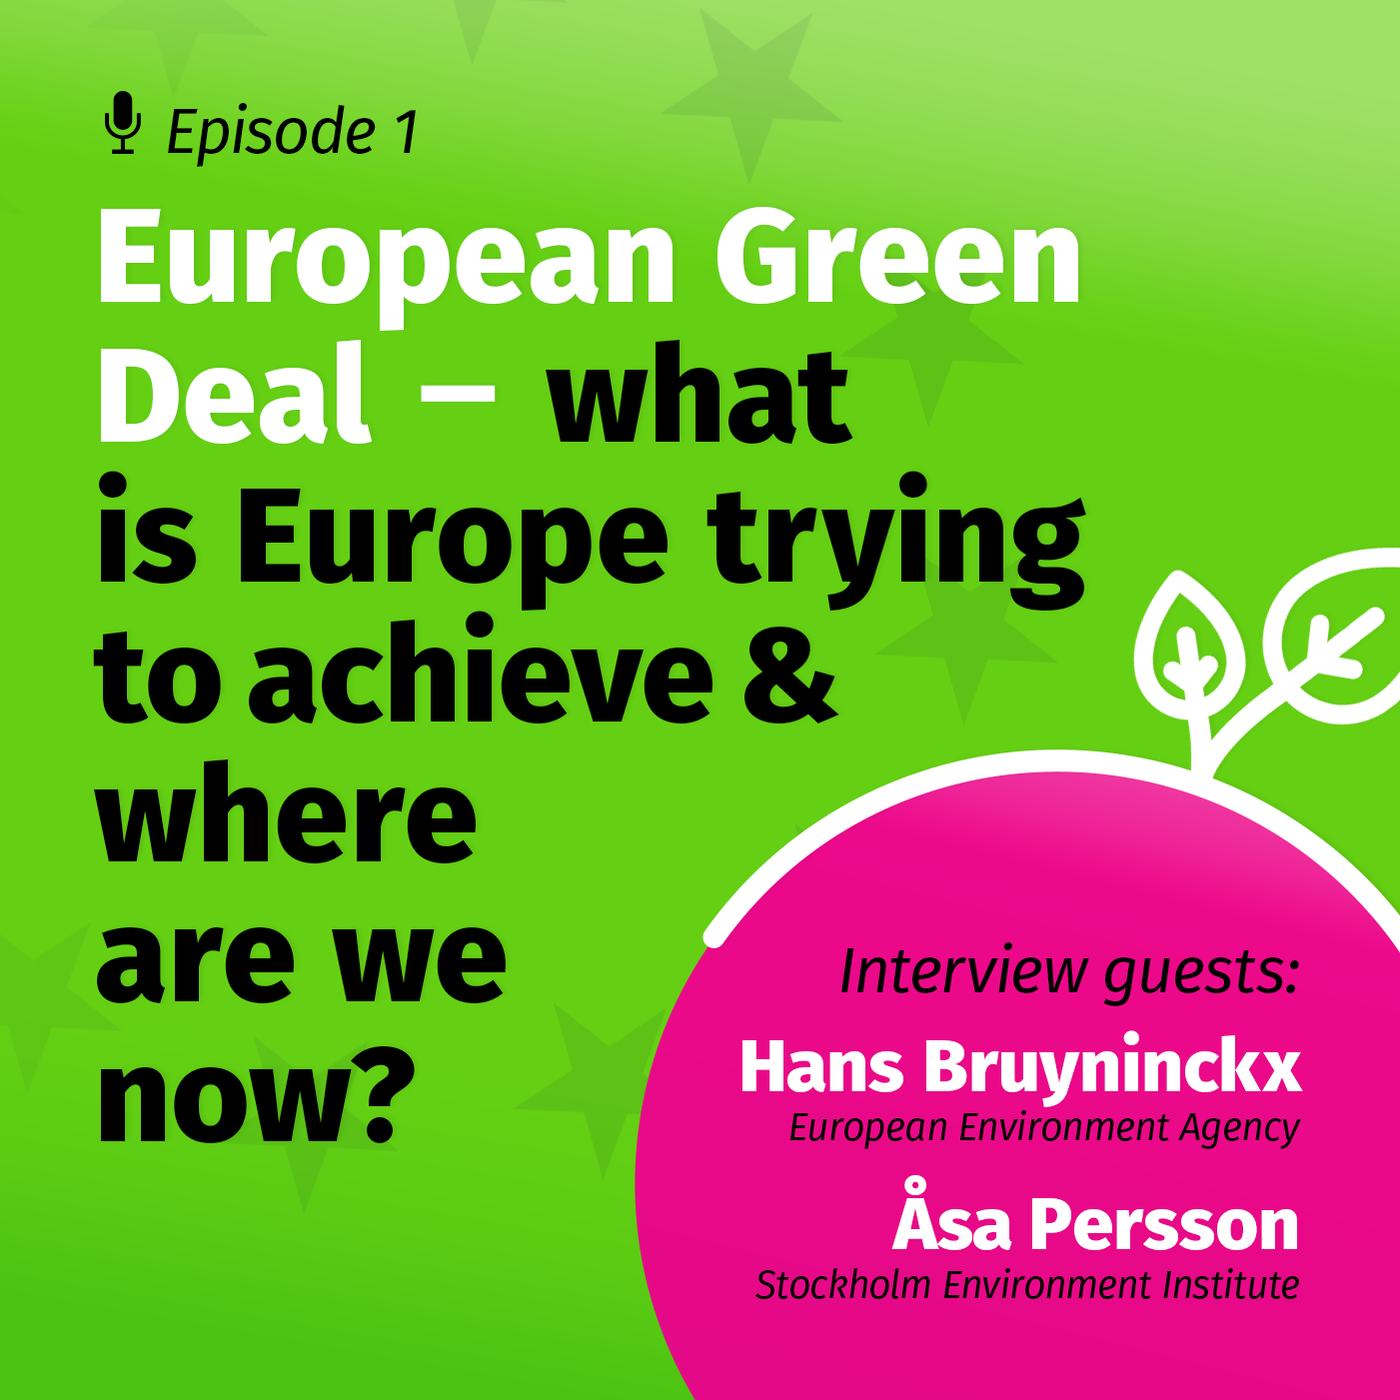 European Green Deal - what is Europe trying to achieve and where are we now?